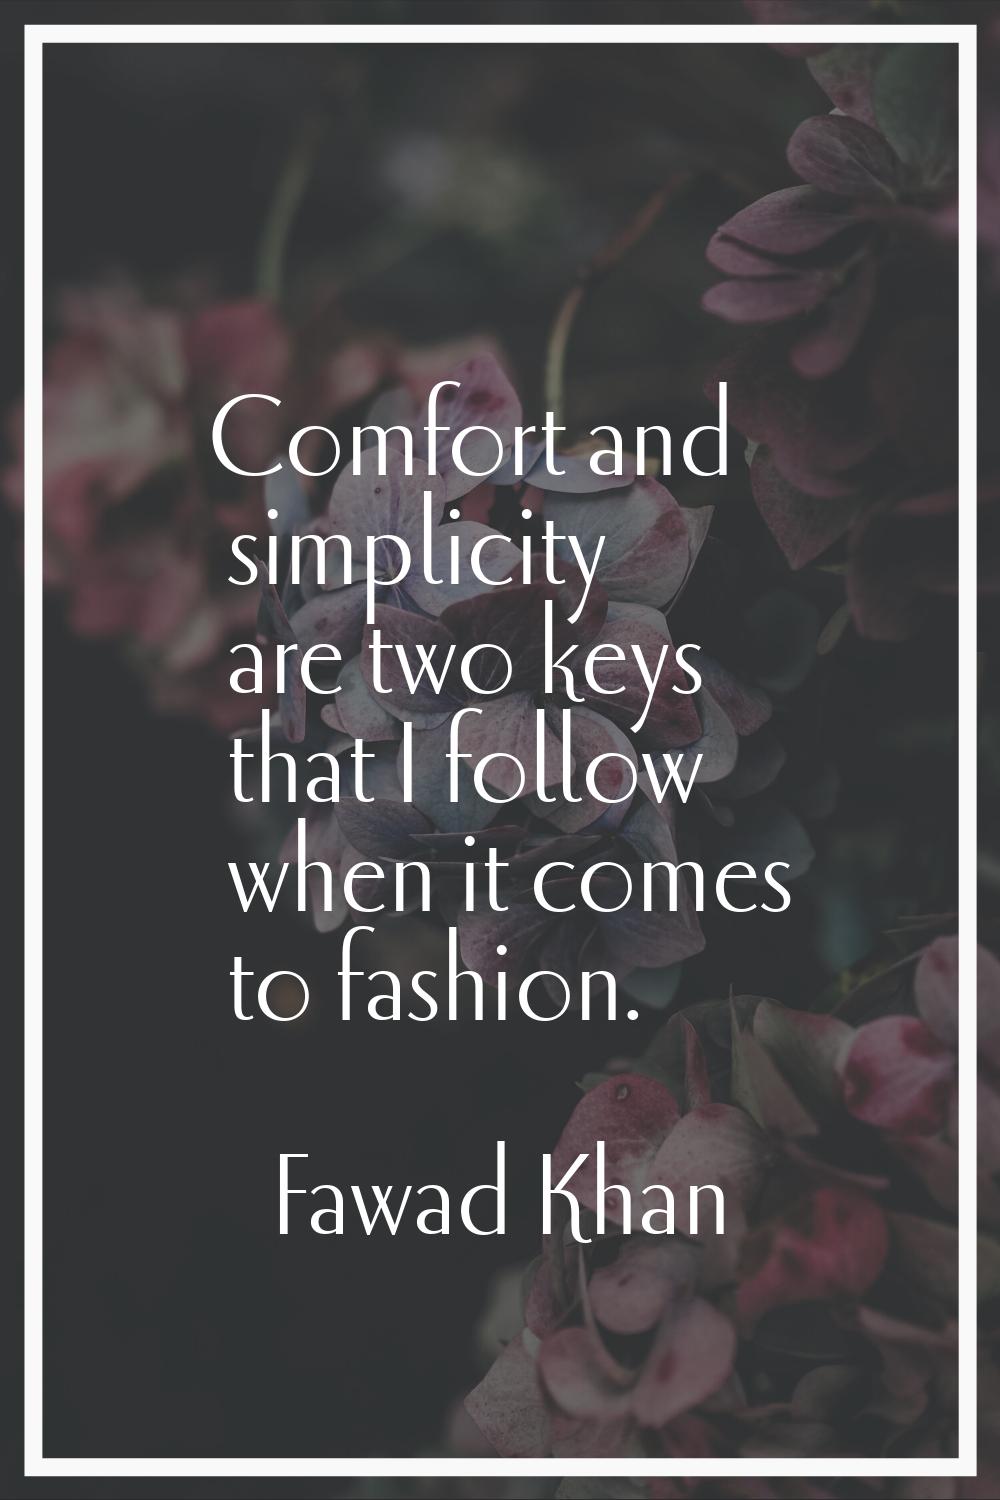 Comfort and simplicity are two keys that I follow when it comes to fashion.